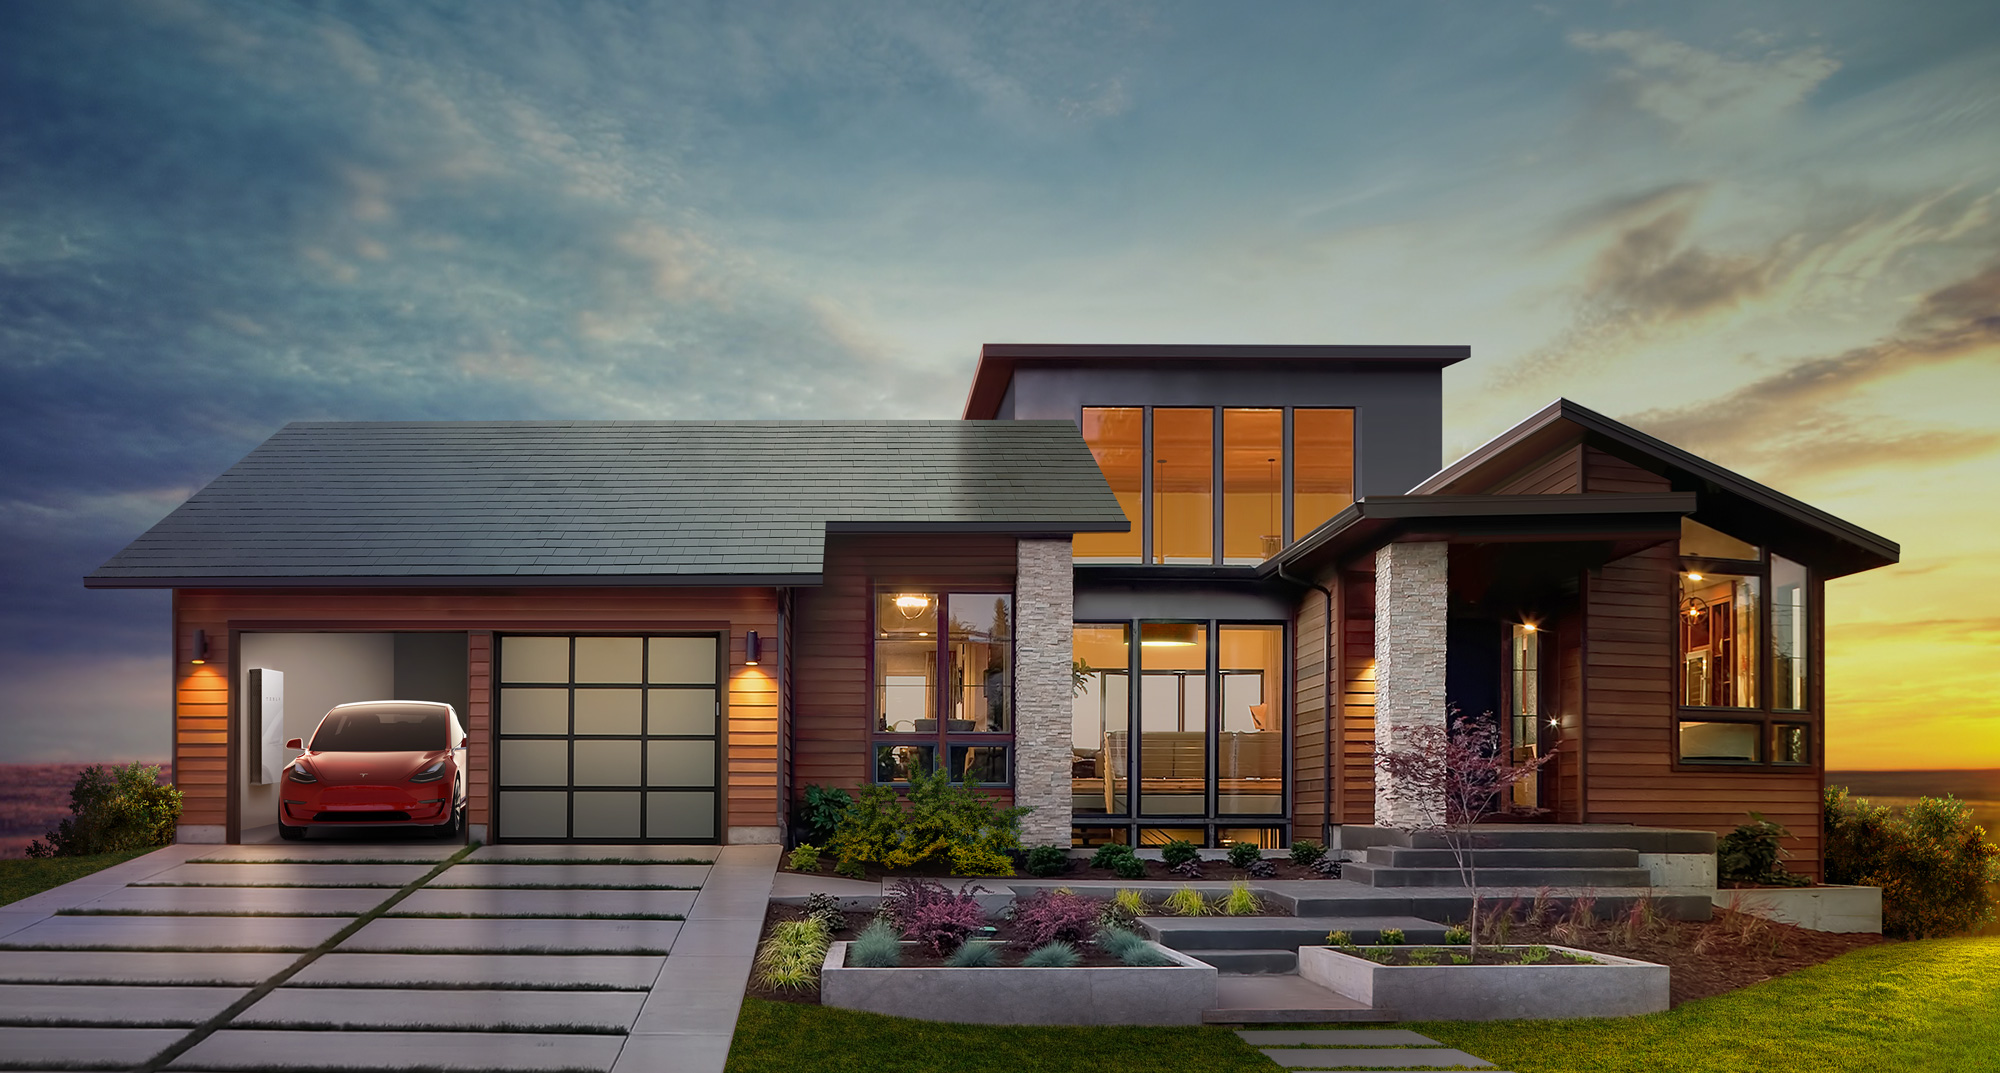 How much will a Tesla Solar Roof cost on my home?